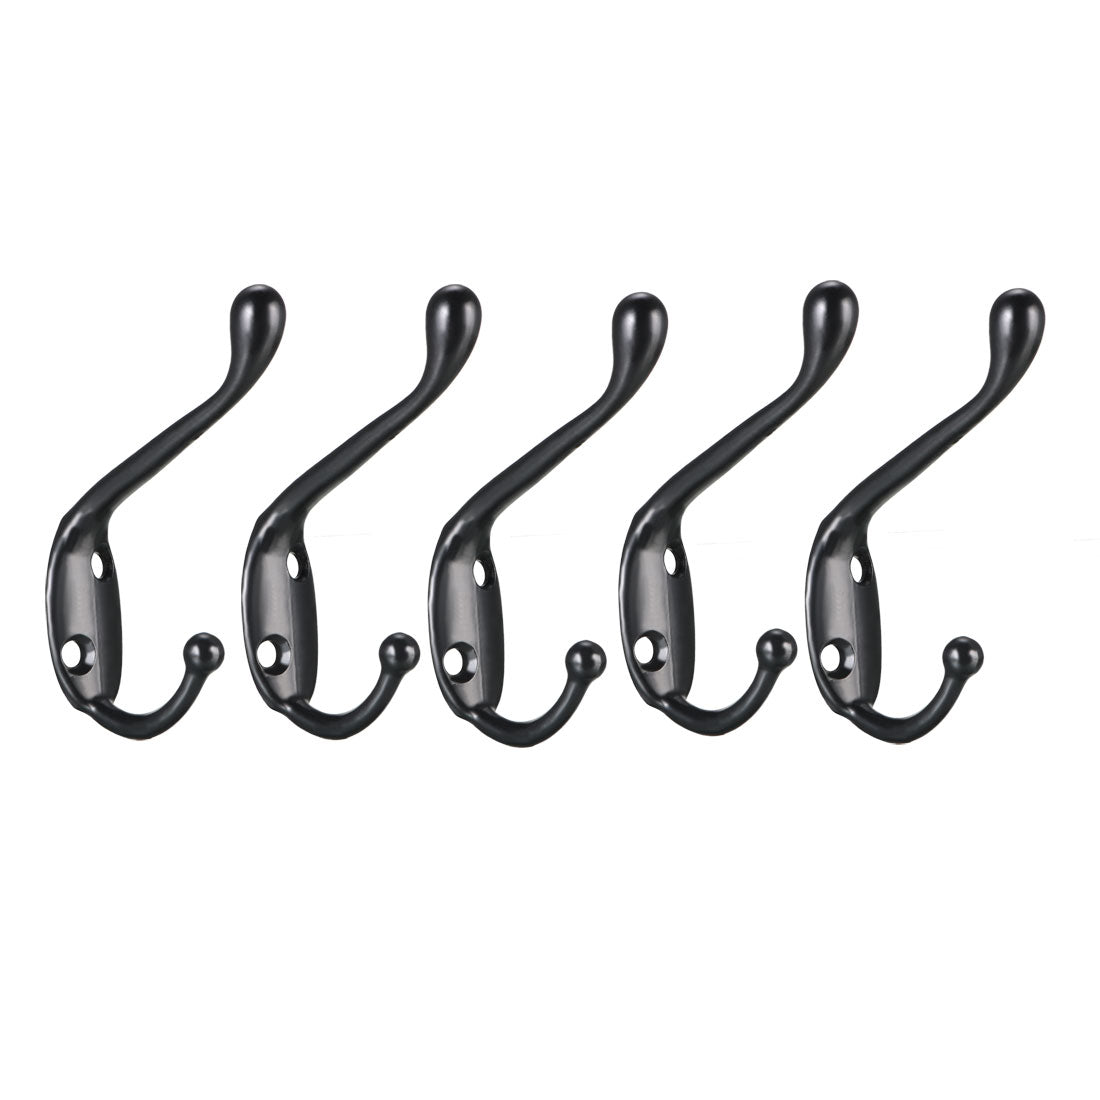 uxcell Uxcell Dual Prong Coat Hooks Wall Mounted Retro Double Hooks Utility Black Hook for Coat Scarf Bag Towel Key Cap Cup Hat 80mm x 18mm x 55mm 5pcs